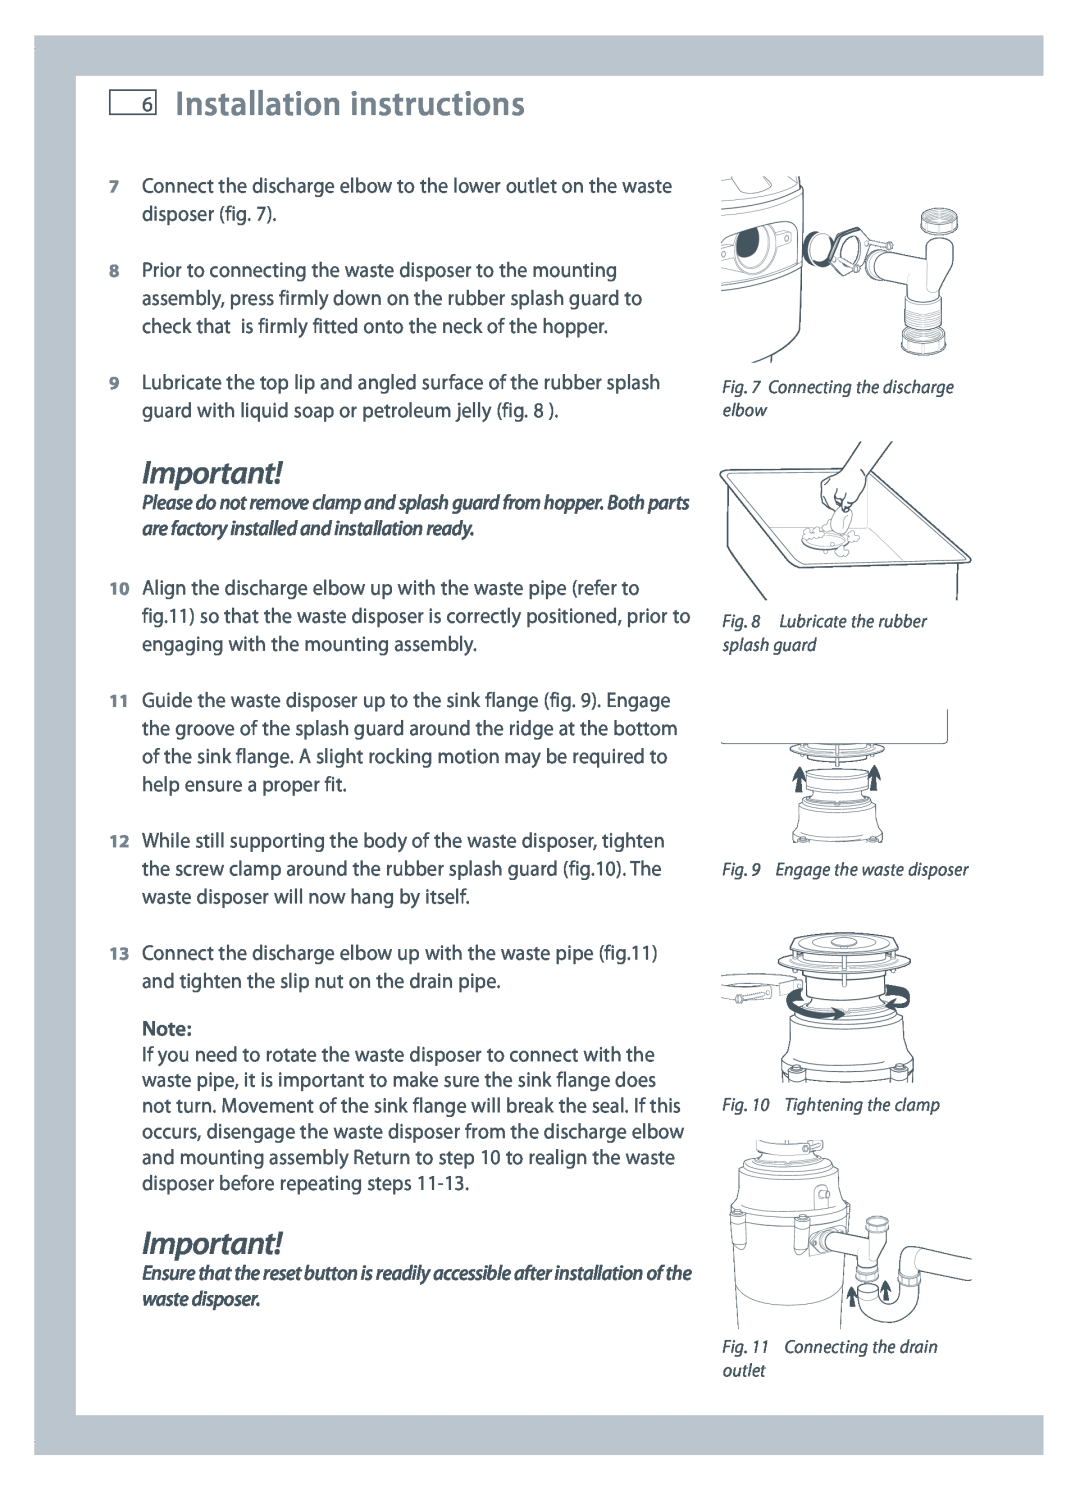 Fisher & Paykel GD50S1 Installation instructions, Connecting the discharge elbow, Lubricate the rubber splash guard 